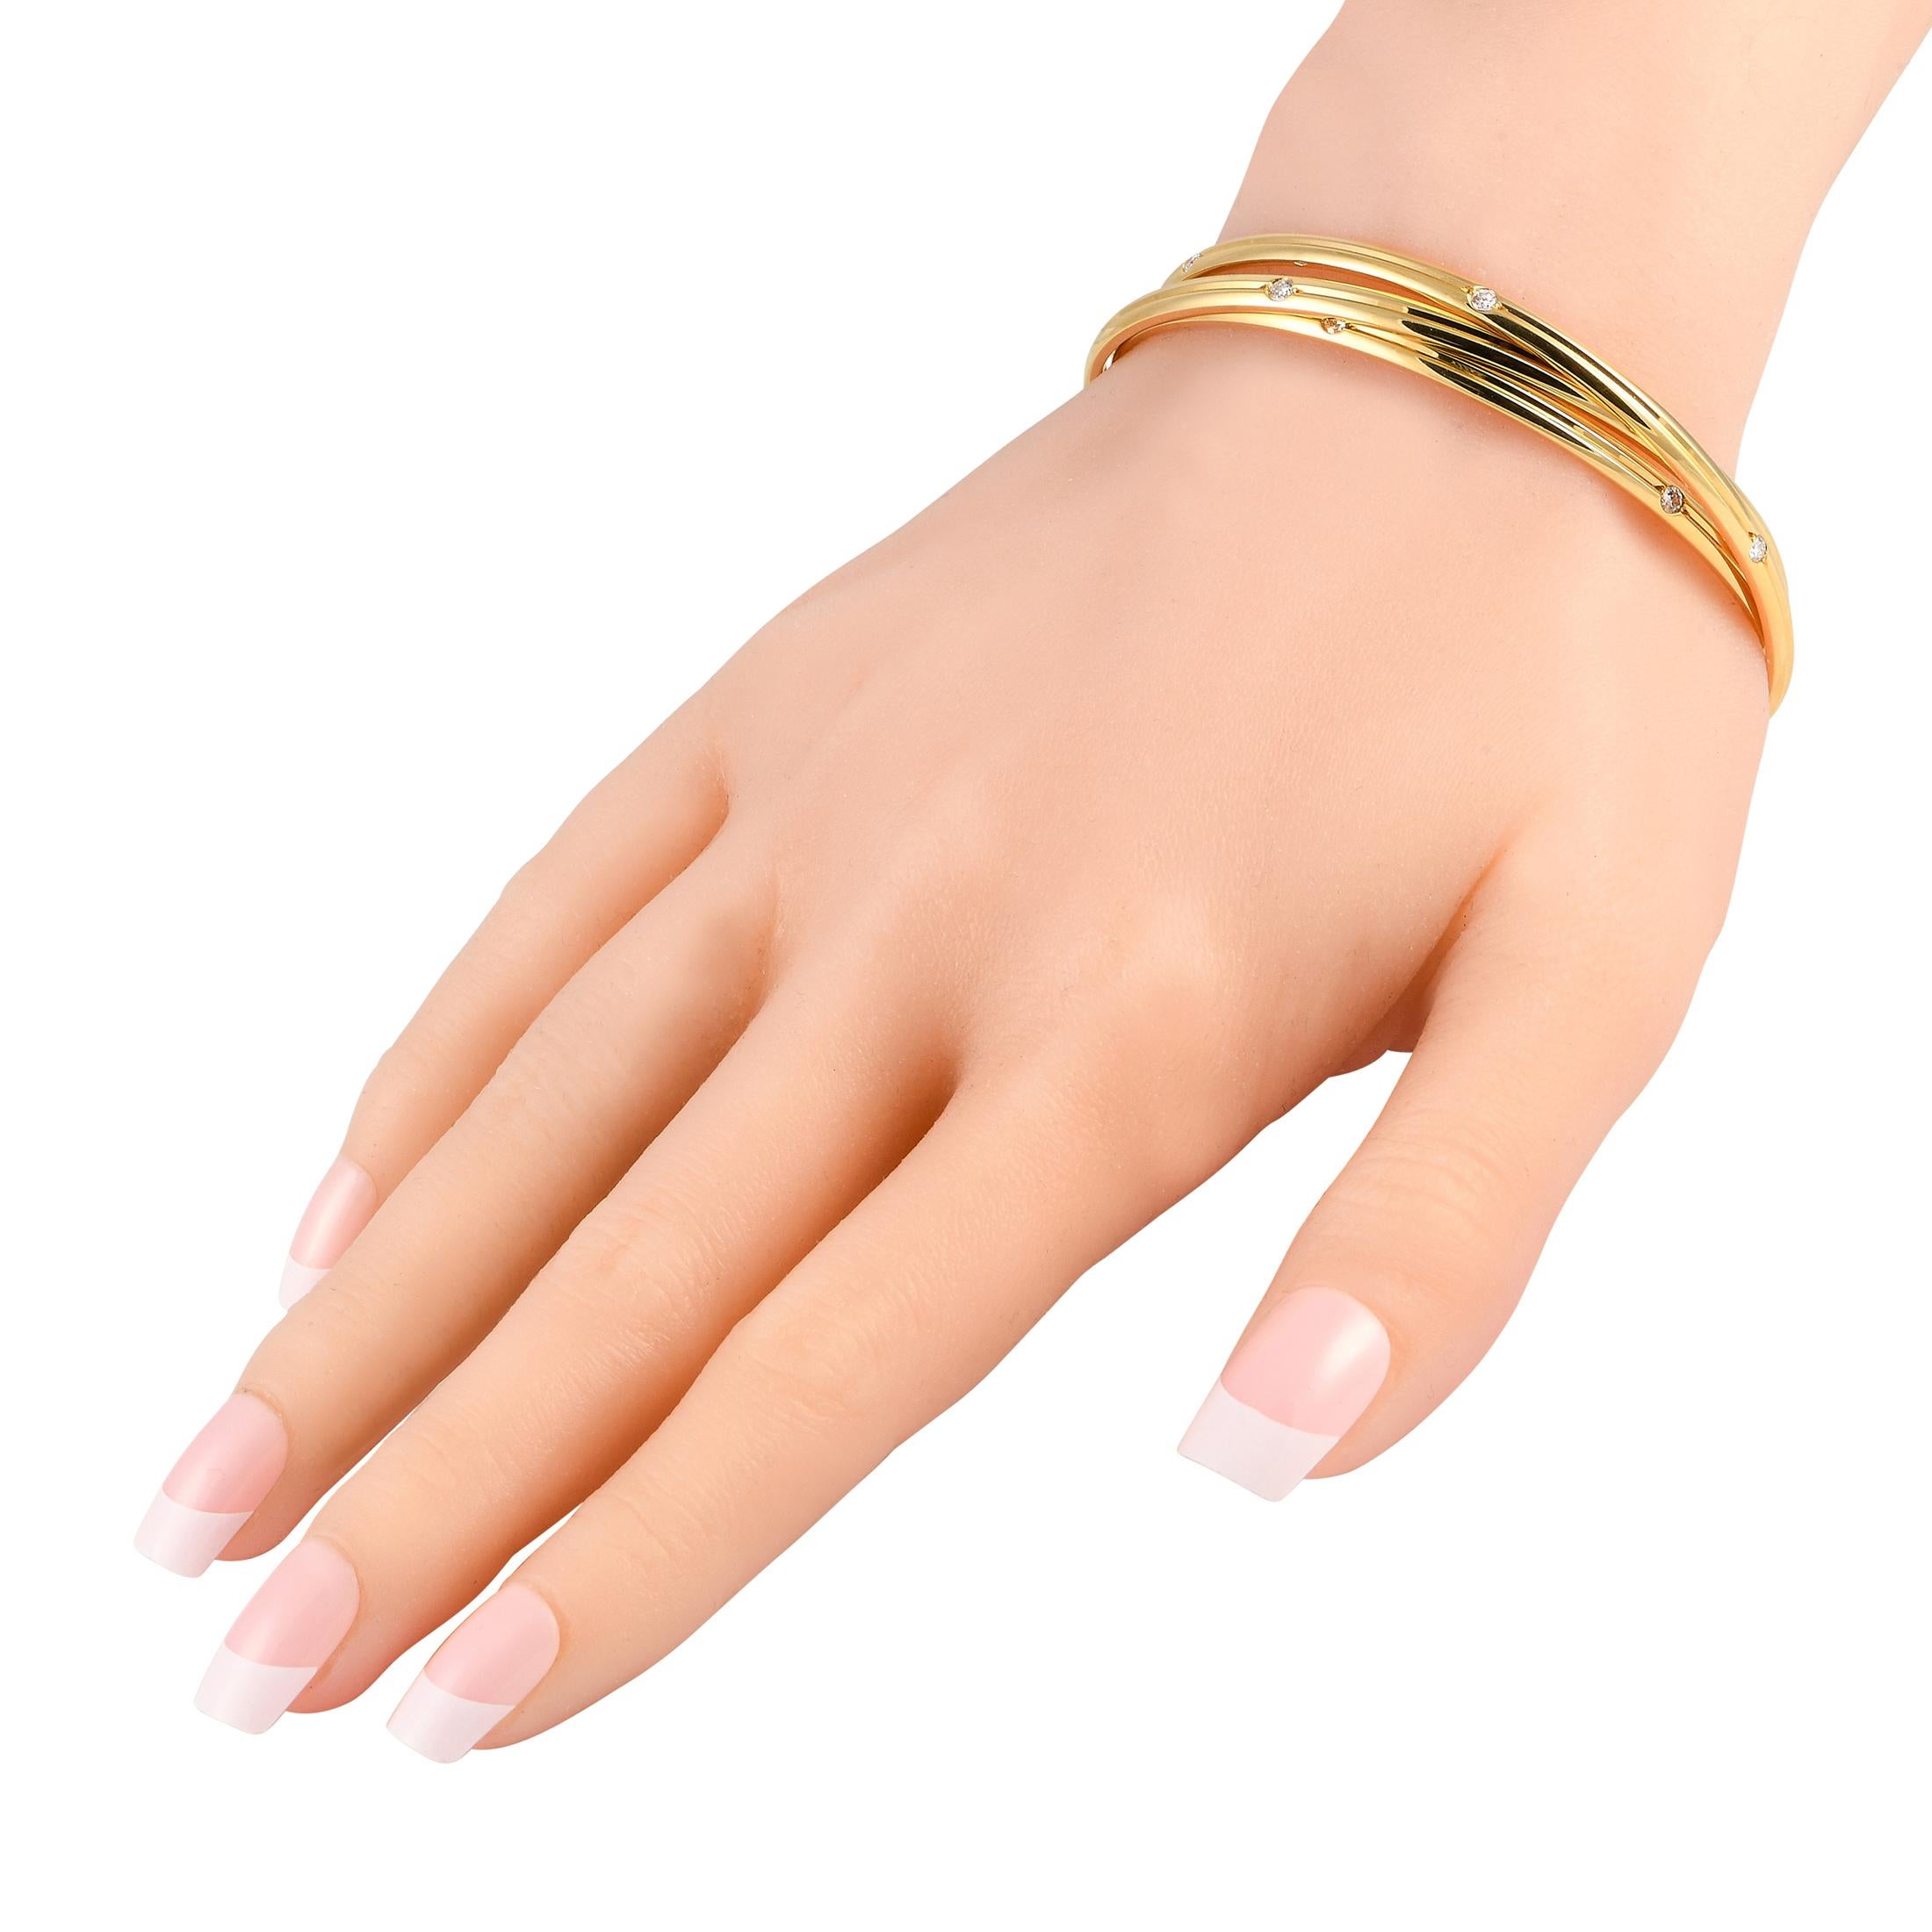 A trio of 18K Yellow Gold bangles are delicately intertwined on this exquisite Cartier Constellation bracelet. Timeless and incredibly chic, this piece measures 7.85 long and features inset Diamond accents with a total weight of 1.0 carats.This